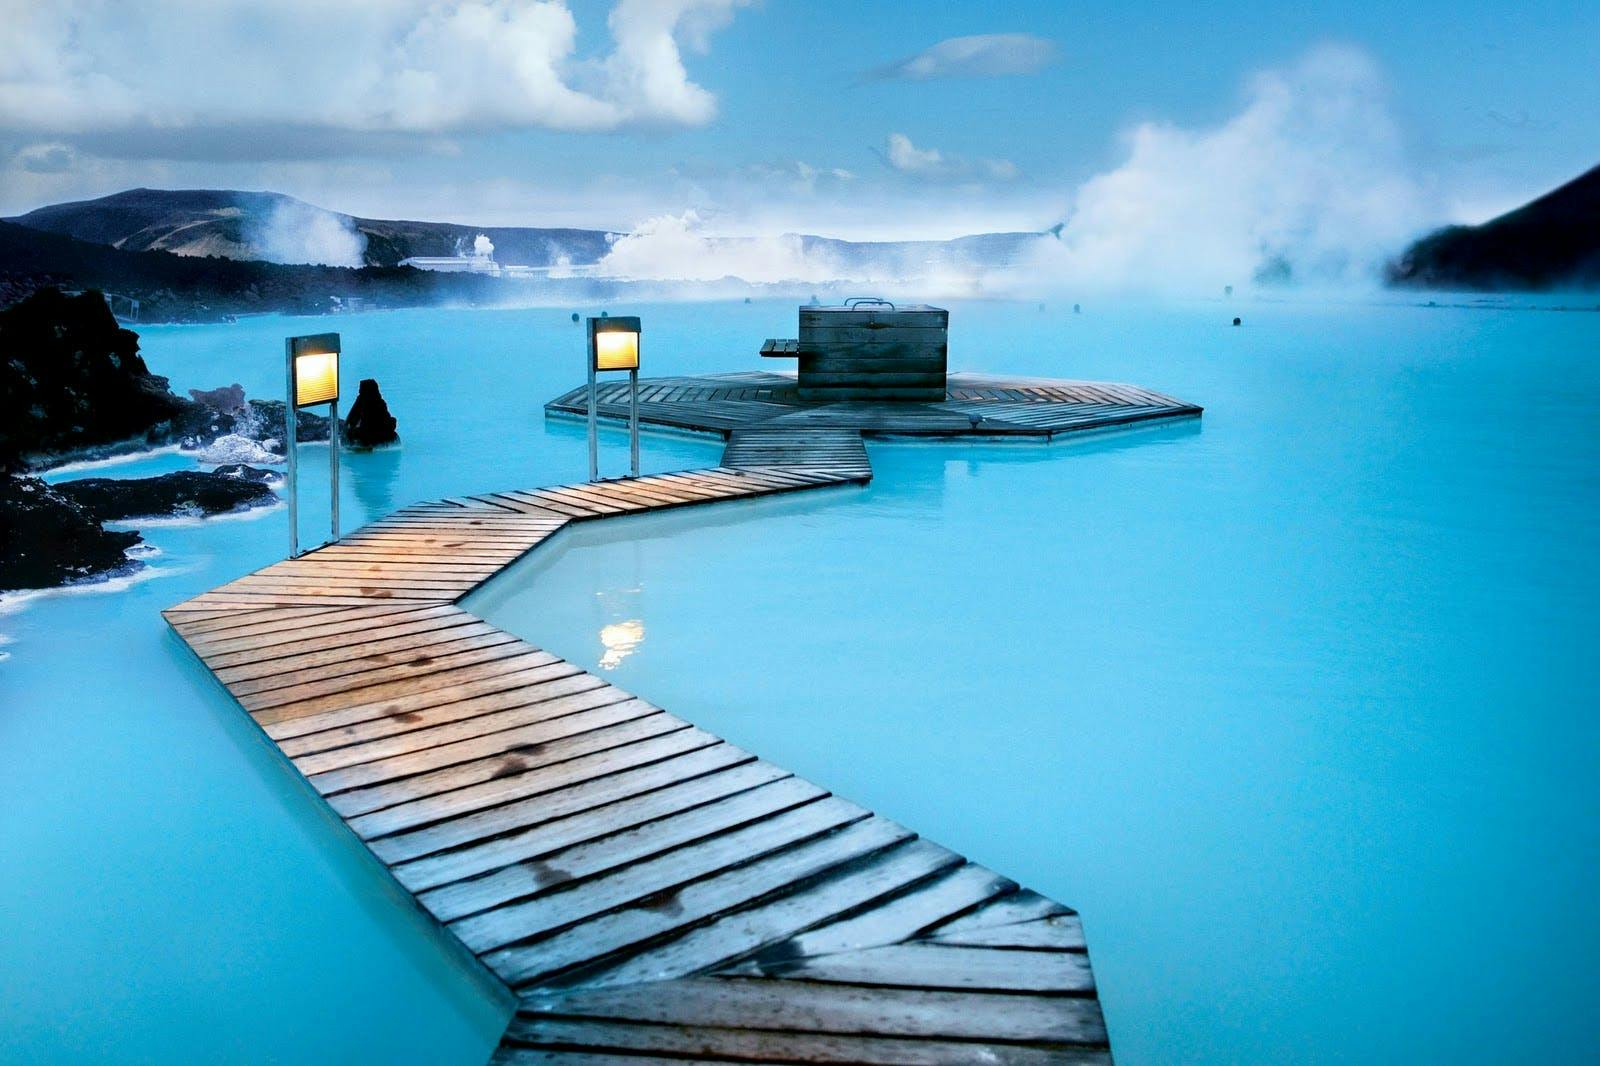 Start your Iceland adventure with a soothing soak in the Blue Lagoon geothermal spa.